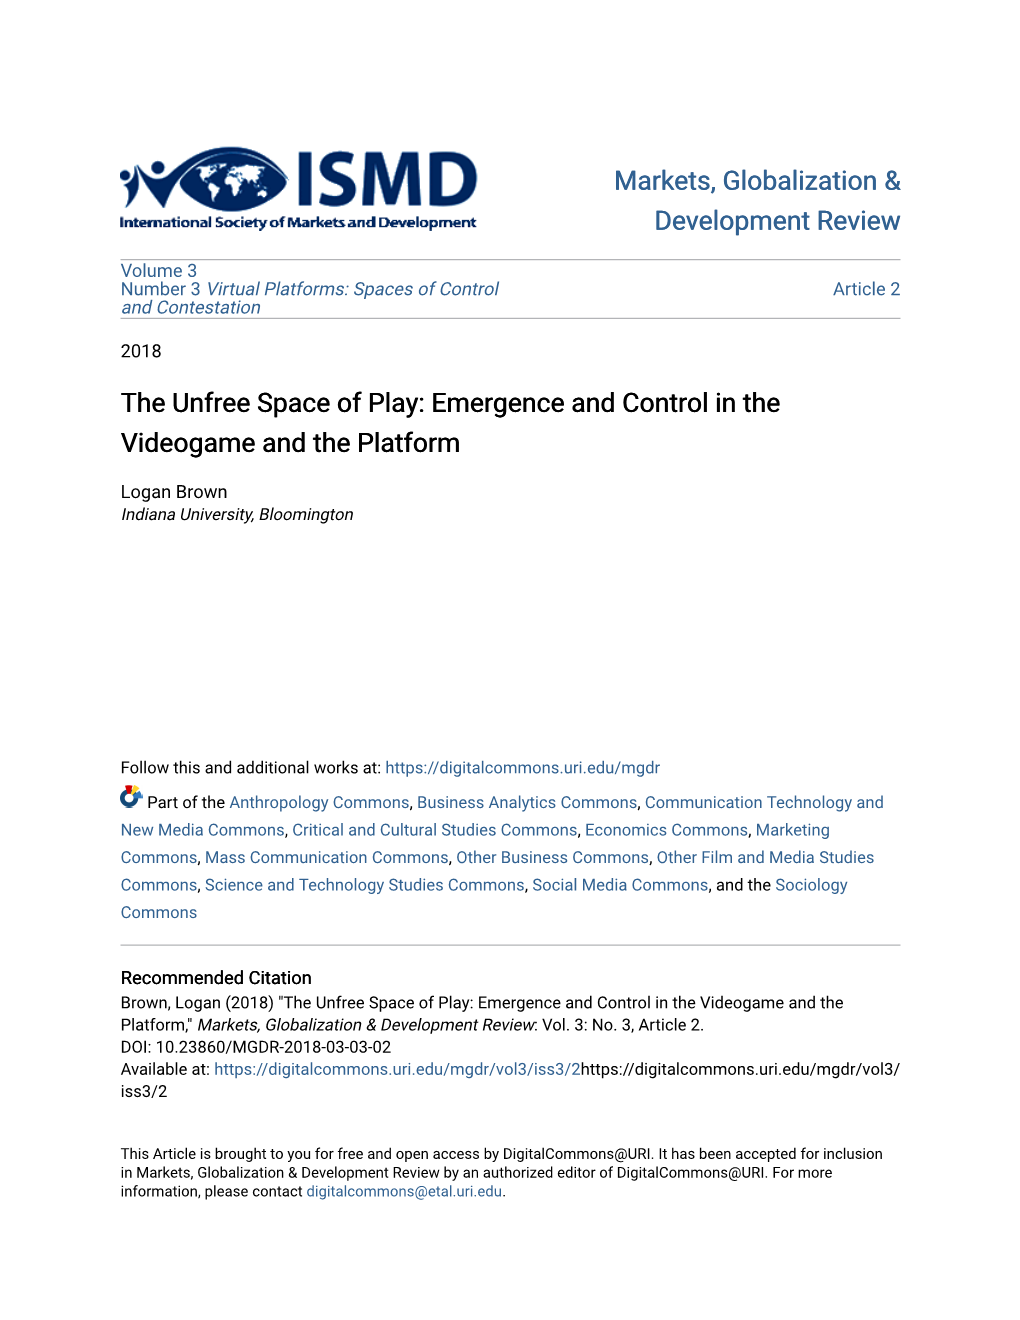 The Unfree Space of Play: Emergence and Control in the Videogame and the Platform